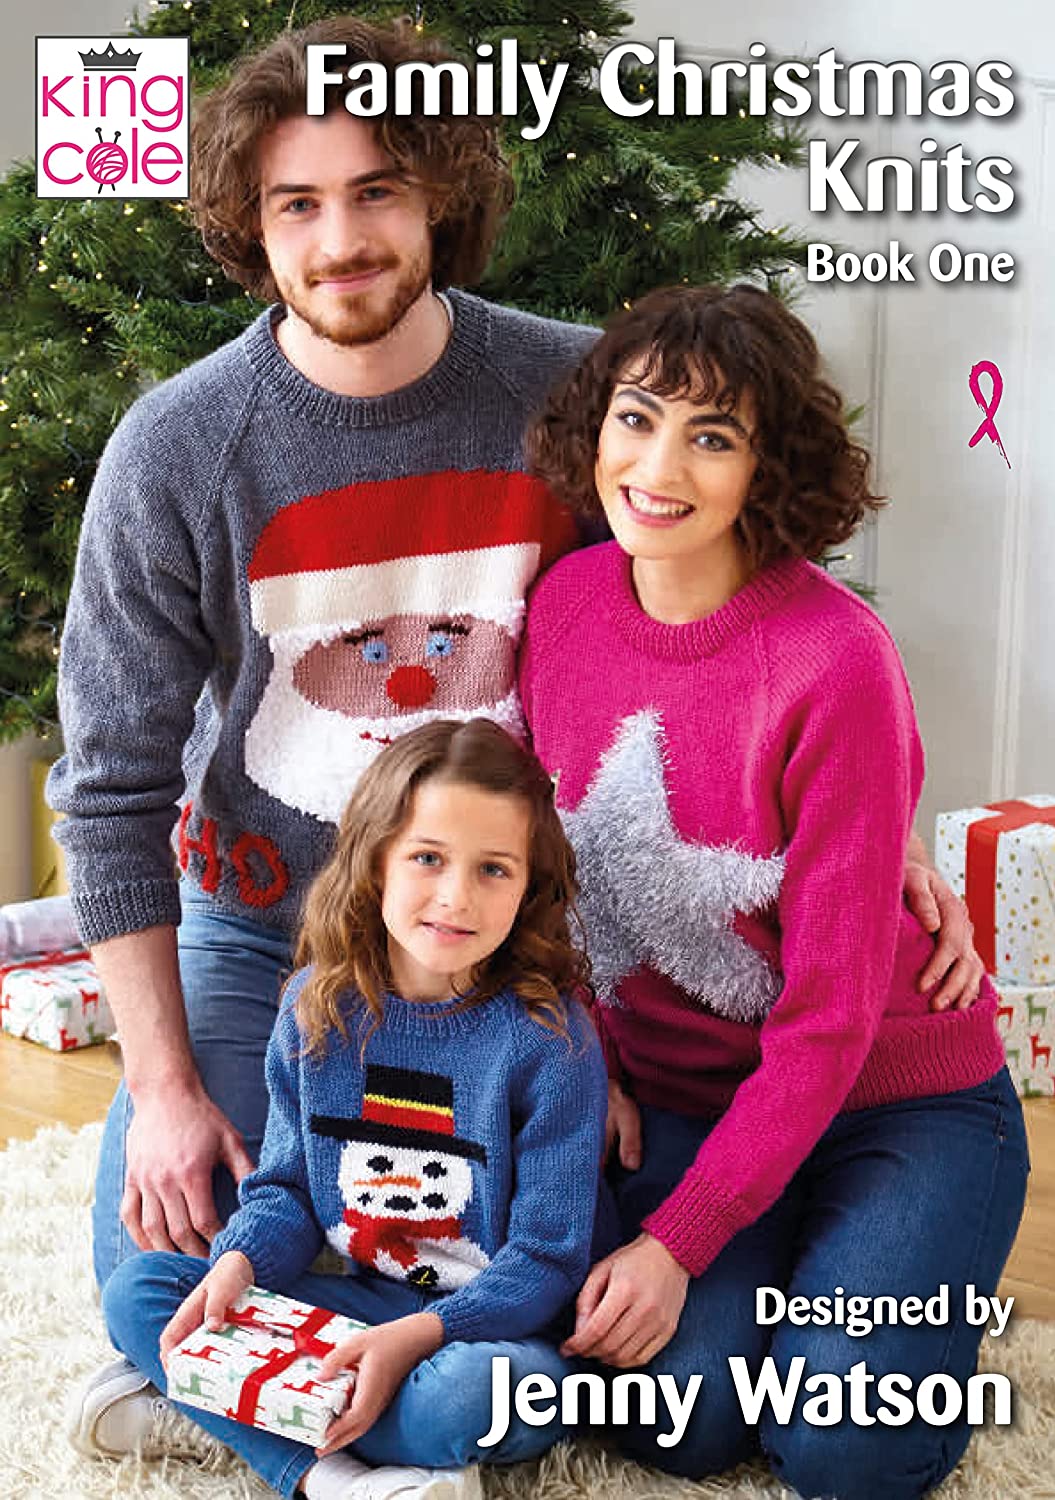 Family Christmas Knits Book One by King Cole